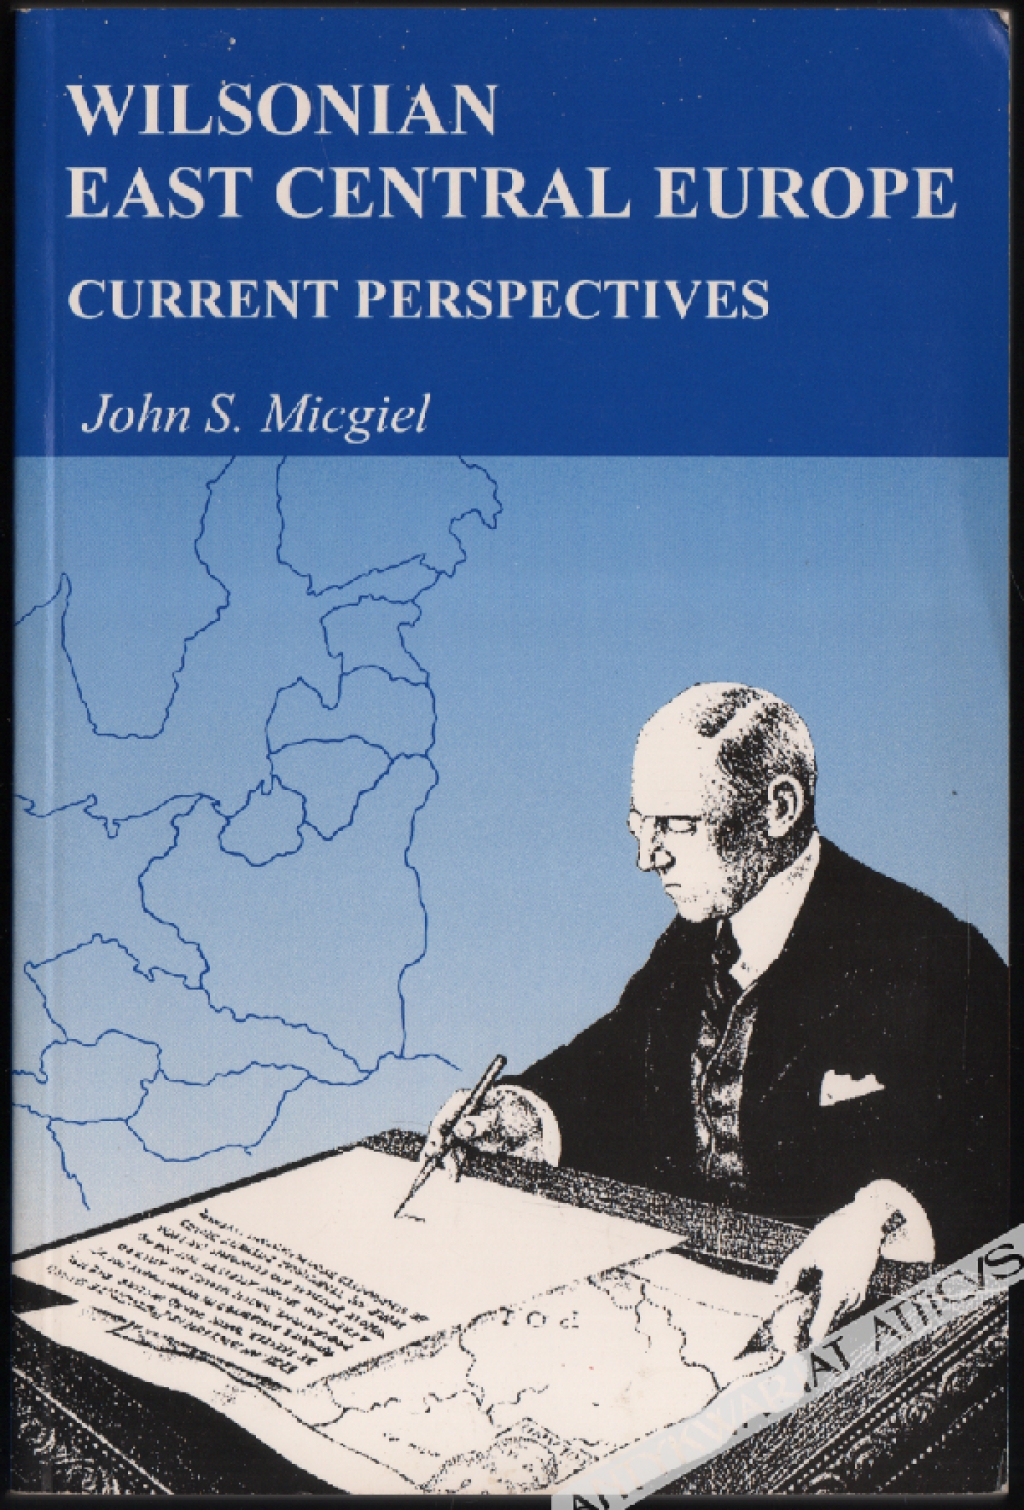 Wilsonian East Central Europe. Current perspectives